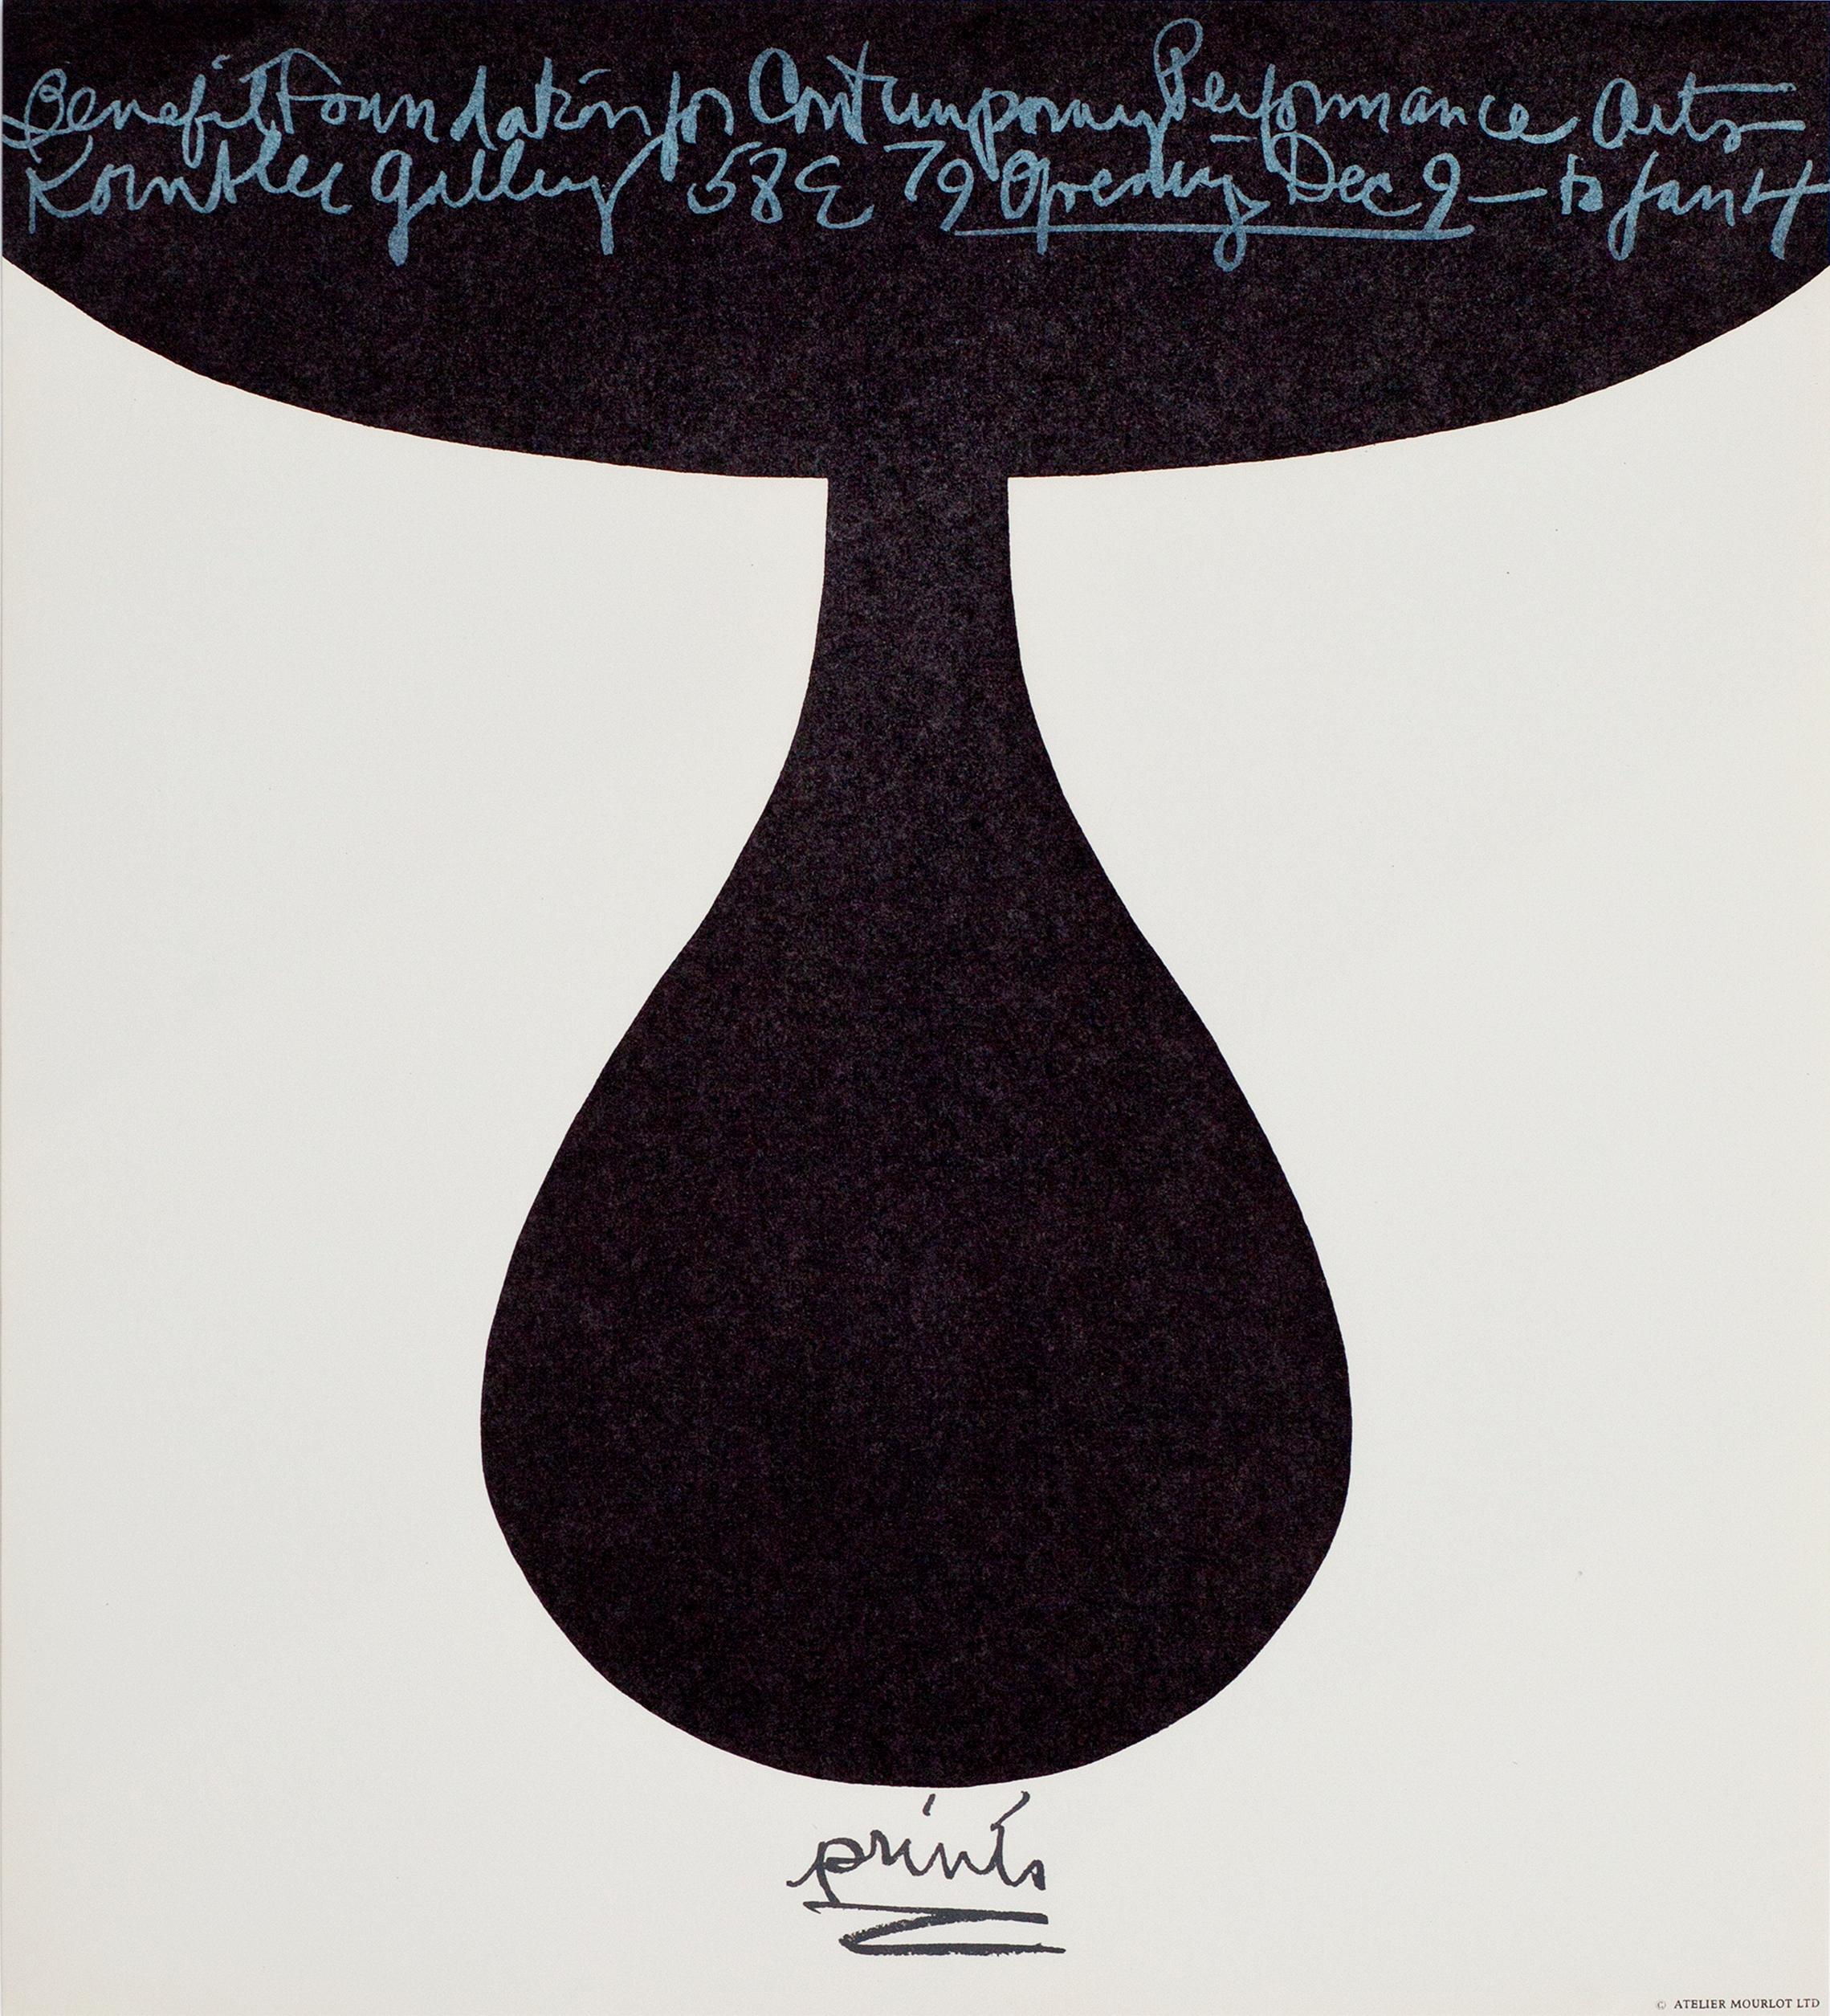 Claes Oldenburg Abstract Print - "Prints: To Benefit the Foundation for Contemporary Performance Arts"